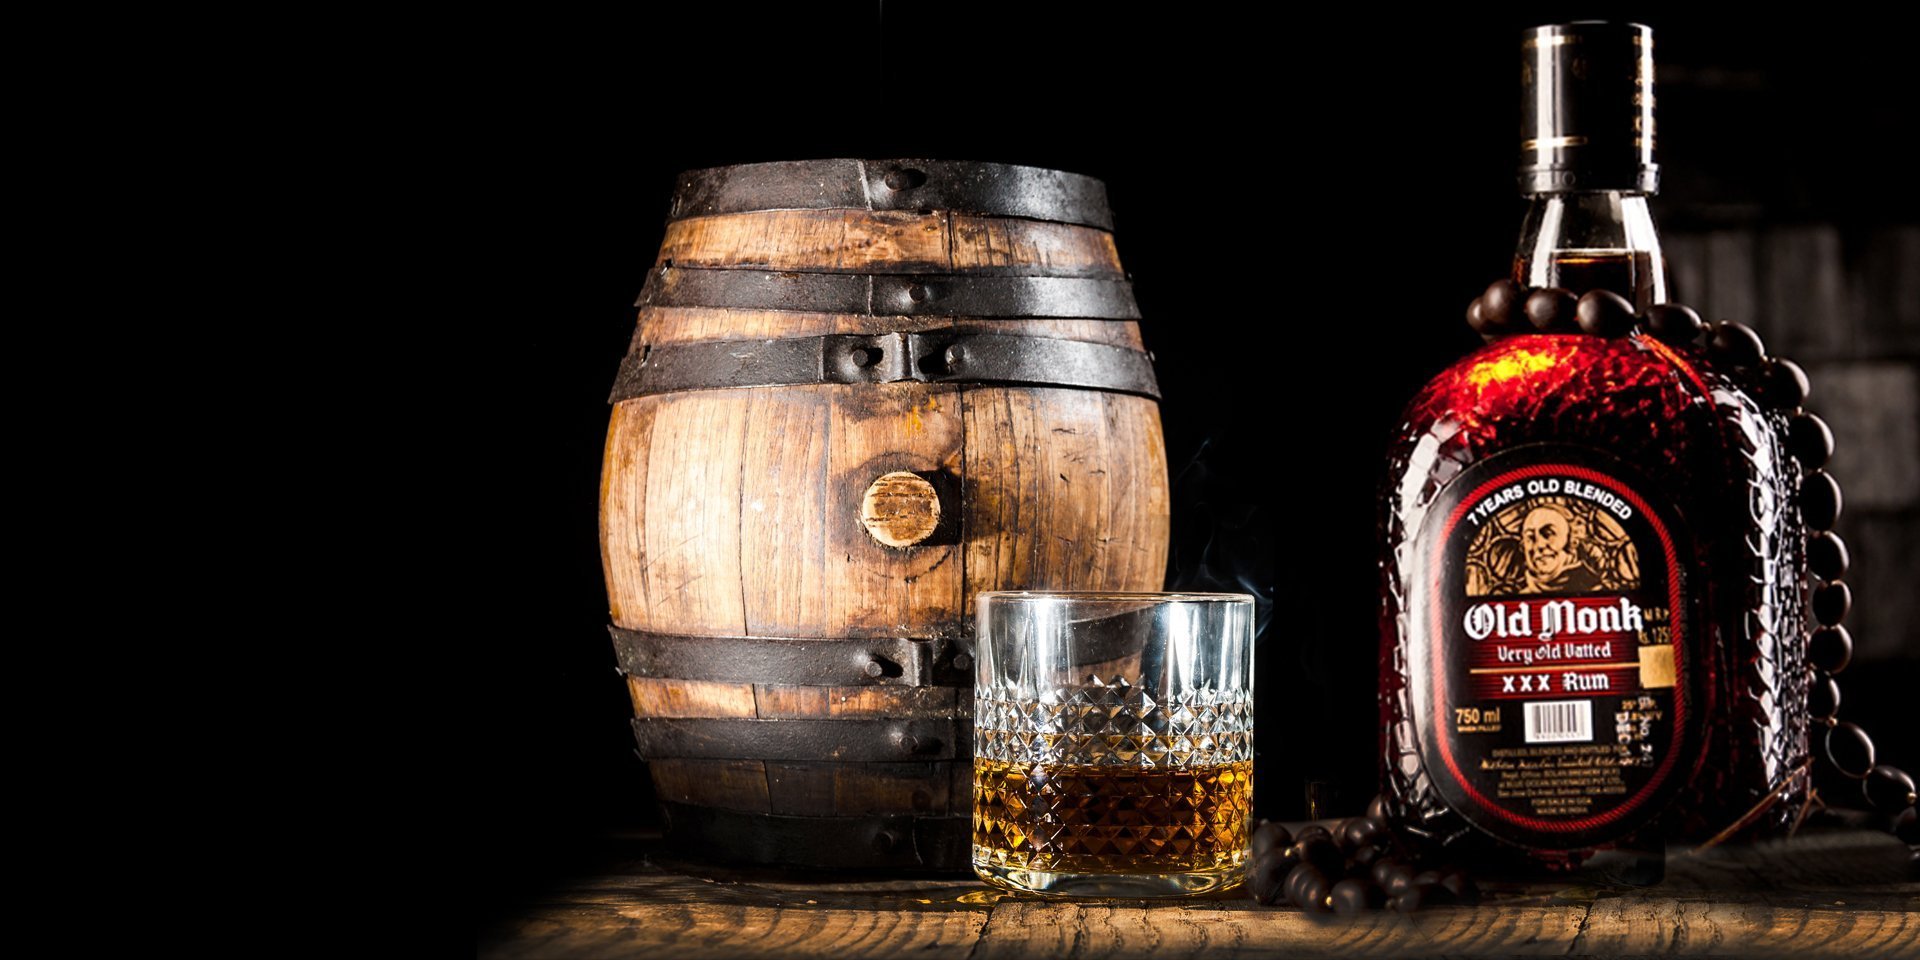 How and why the rum got its name Old Monk